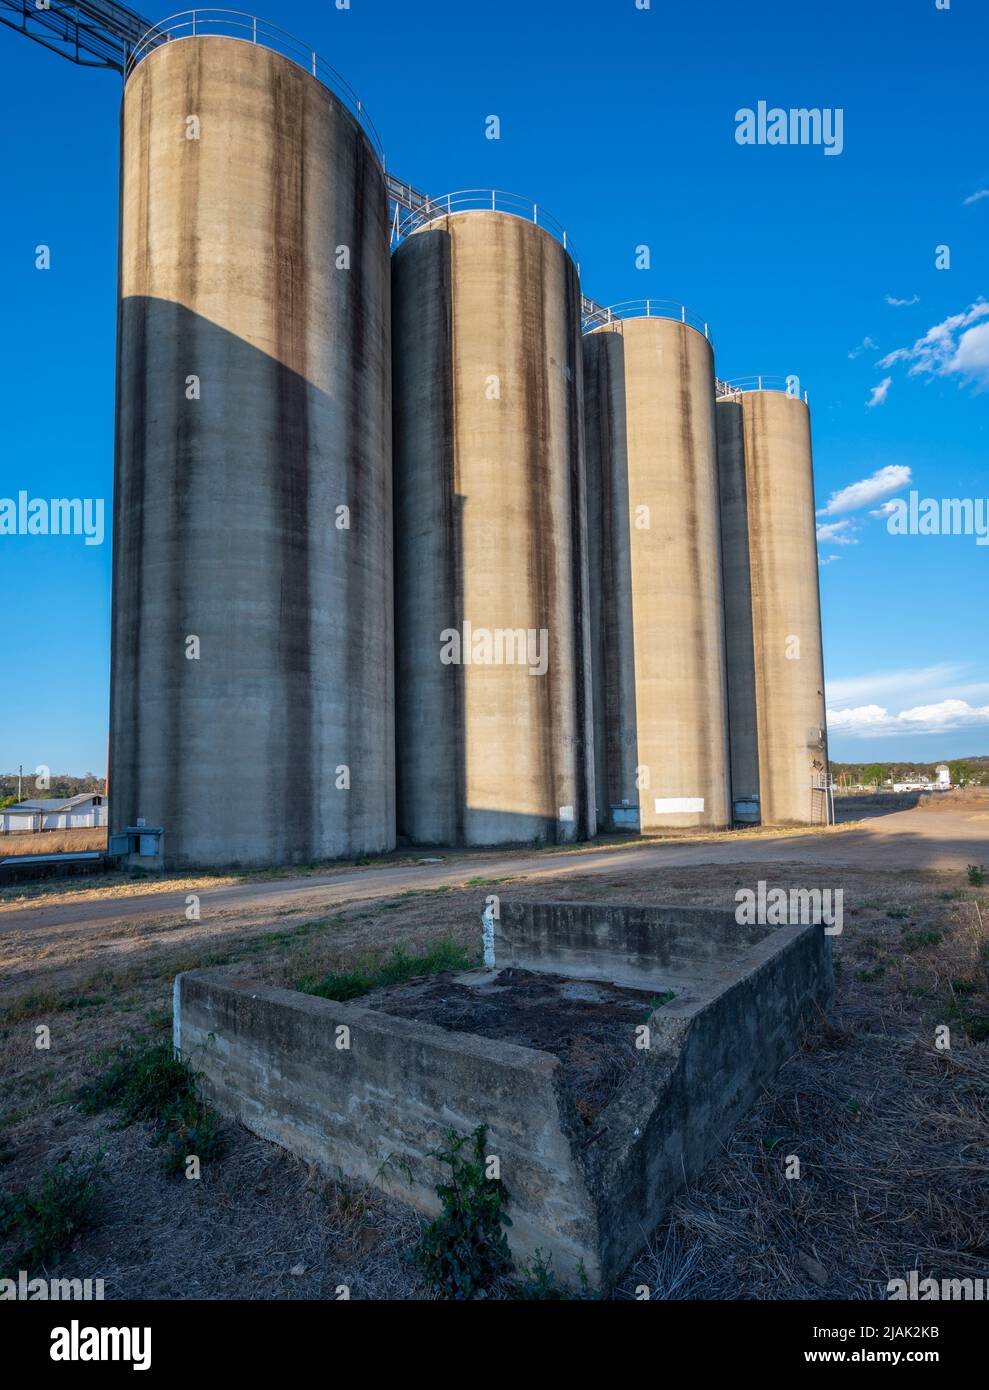 Disused Grain Silo's at Inverell, New South Wales, Australia, on the old Moree to Inverell railway line, built 1934, since closed Stock Photo